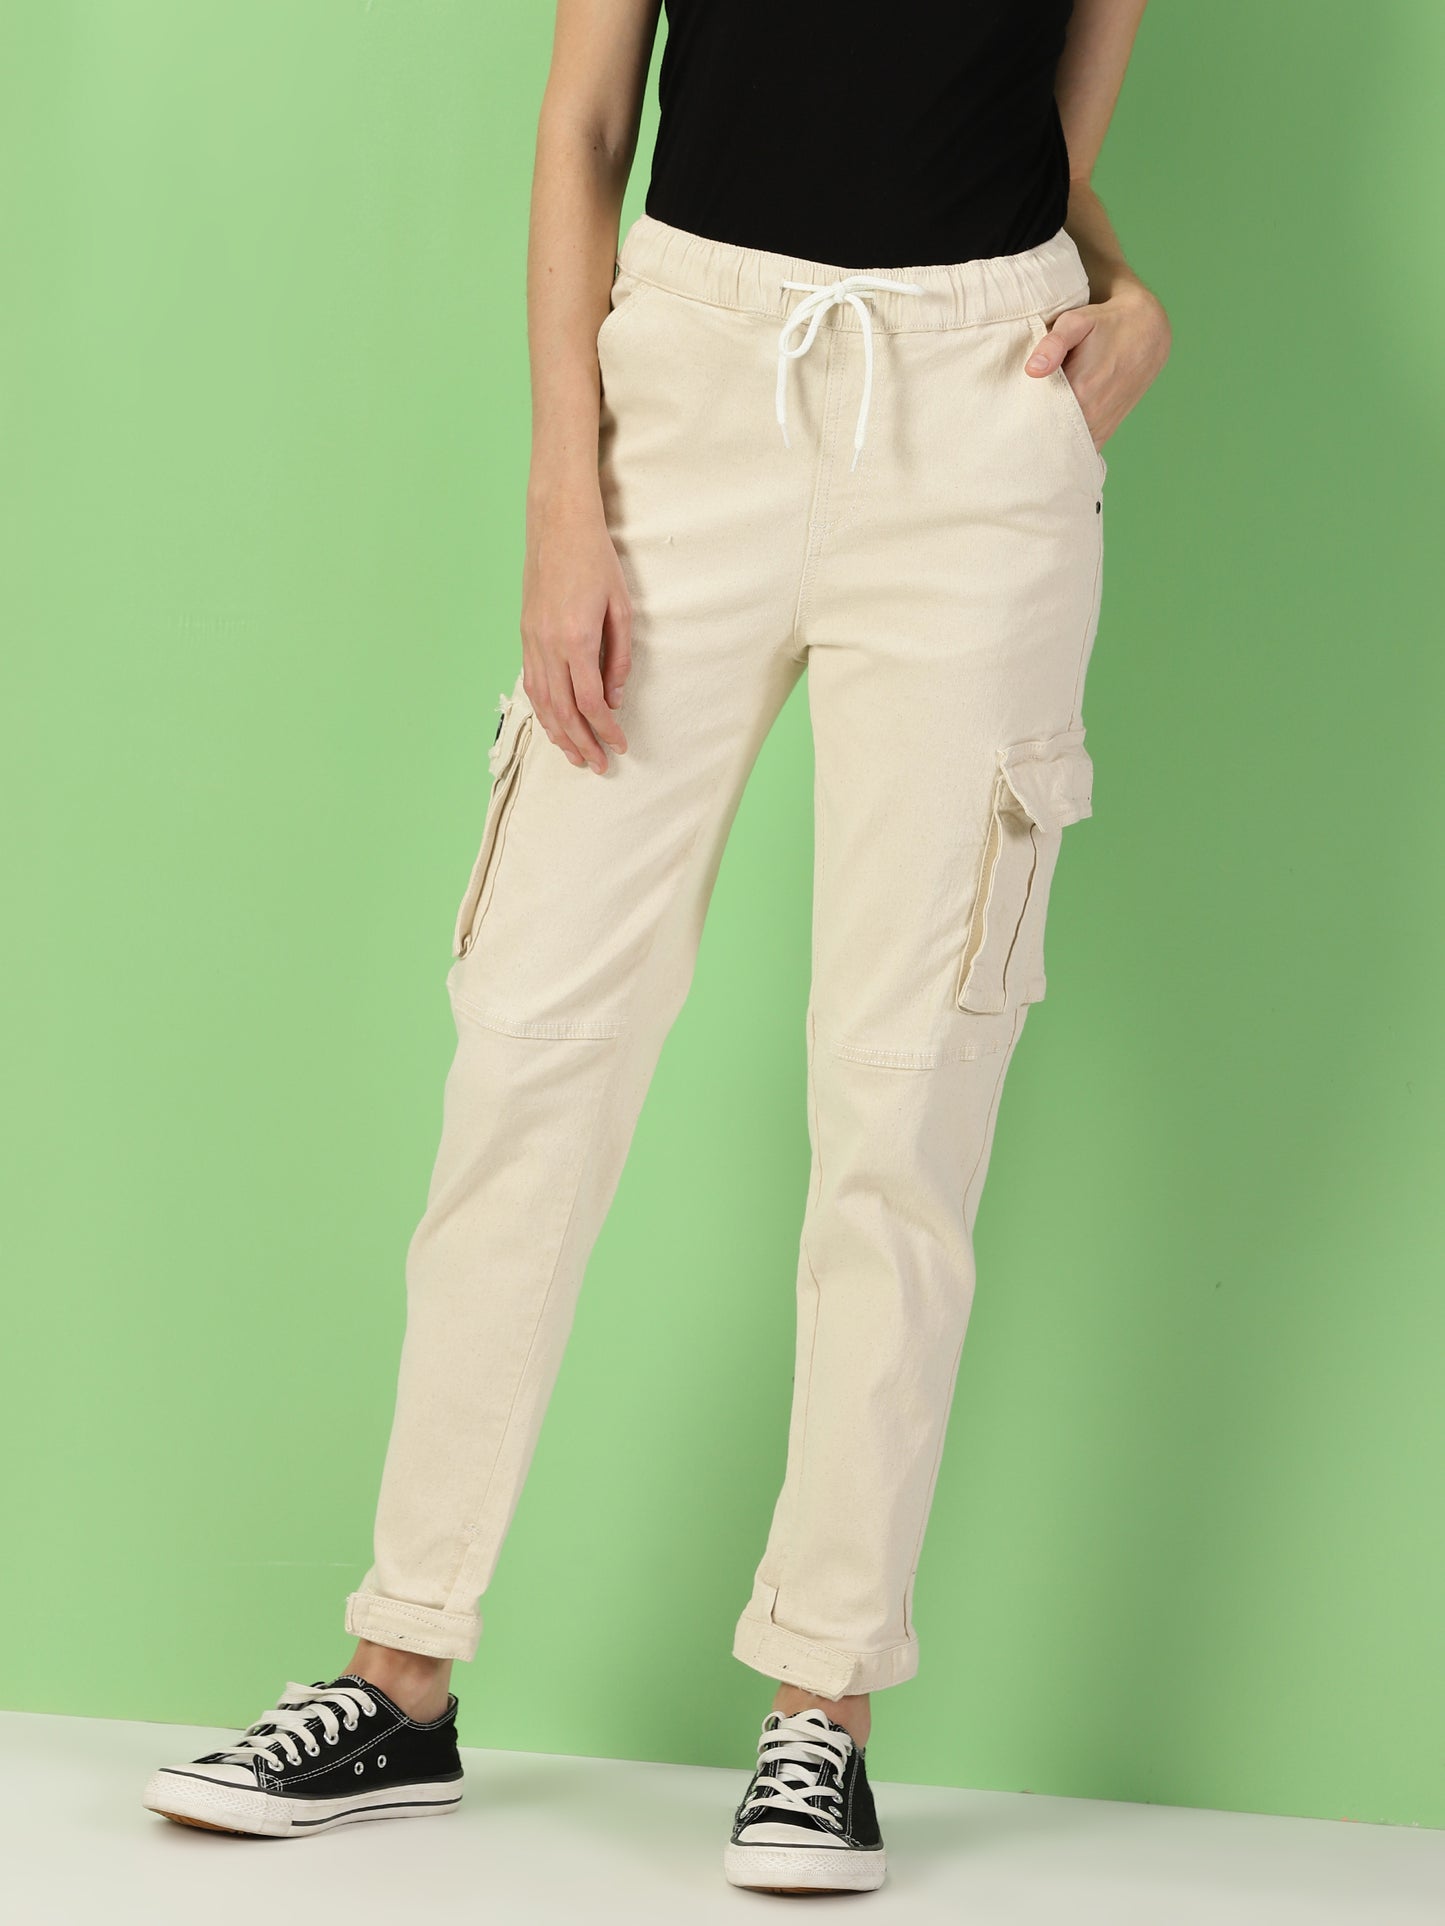 THIRD QUADRANT women jeans feature a hip hop-inspired design with cargo pockets that add a touch of utility and style.